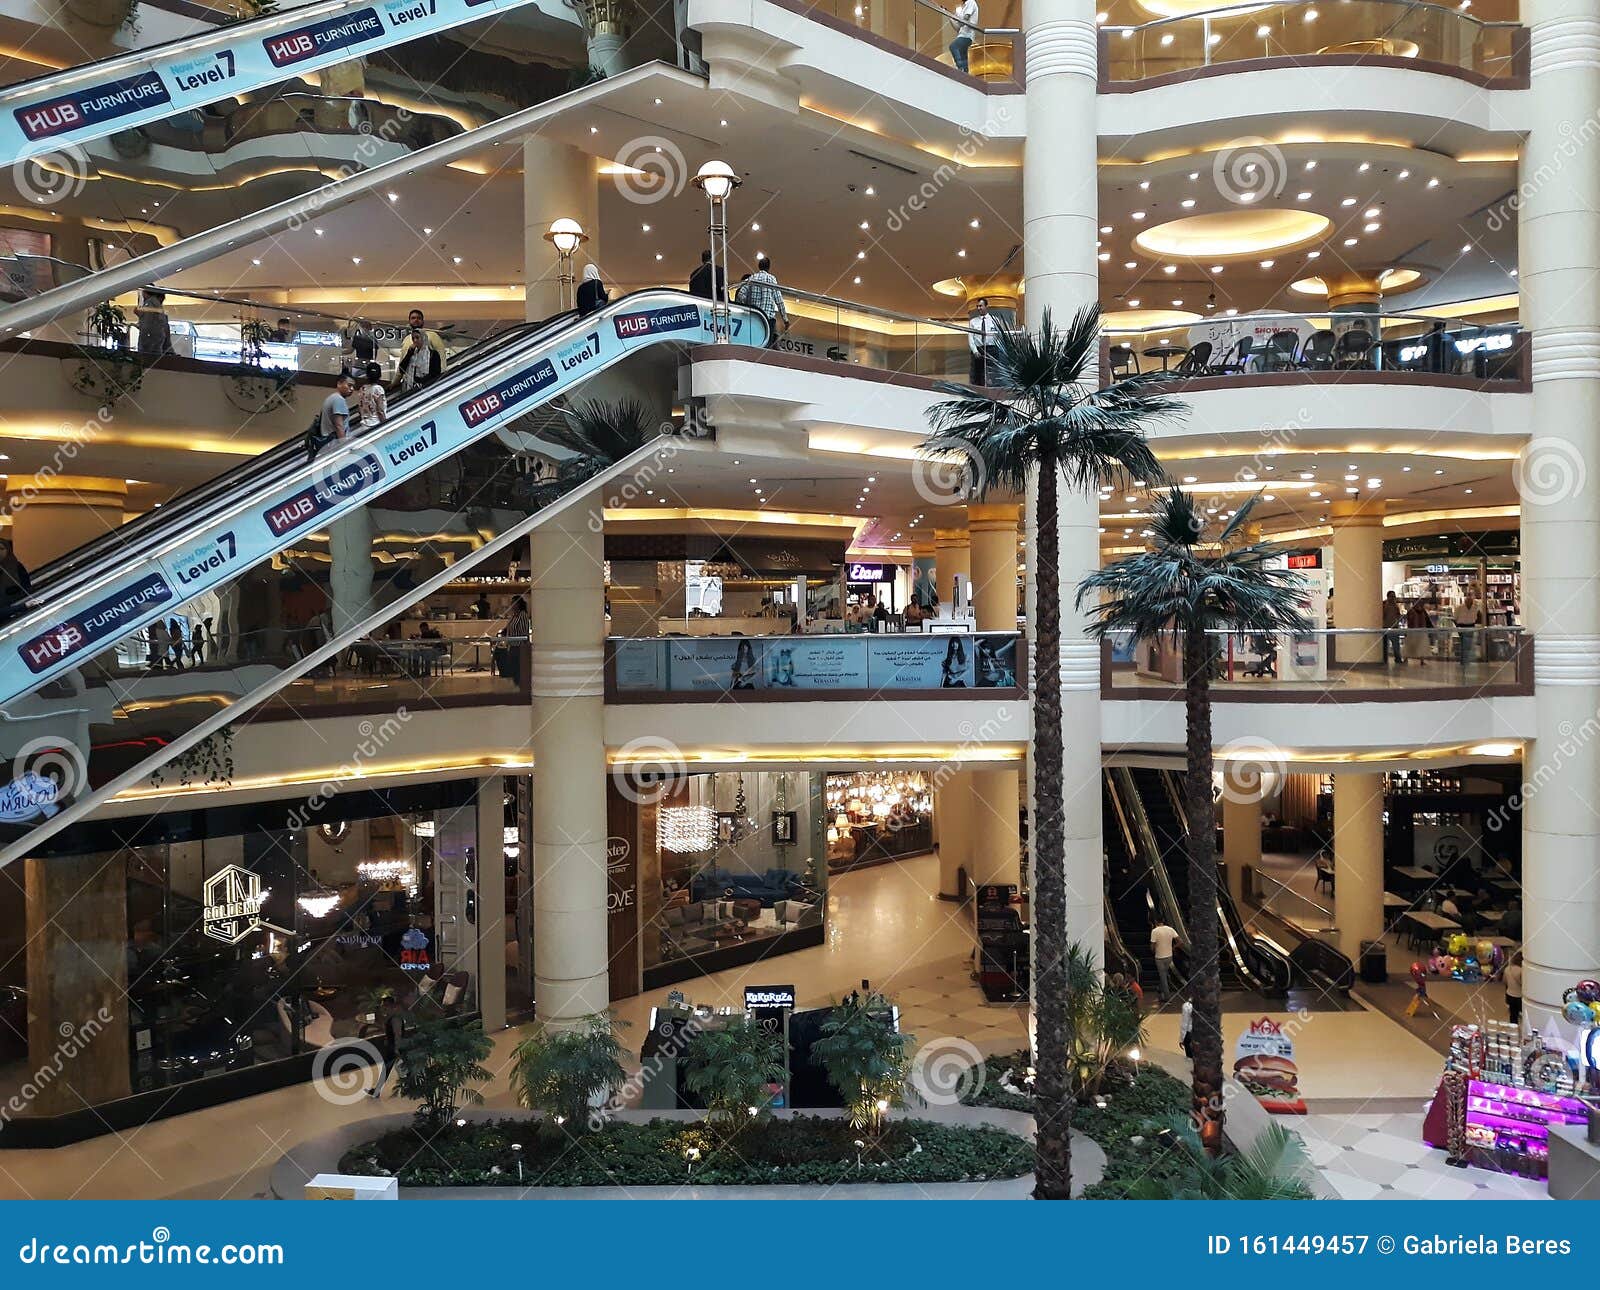 Citystars Shopping Mall. Over 750 luxurious stores.